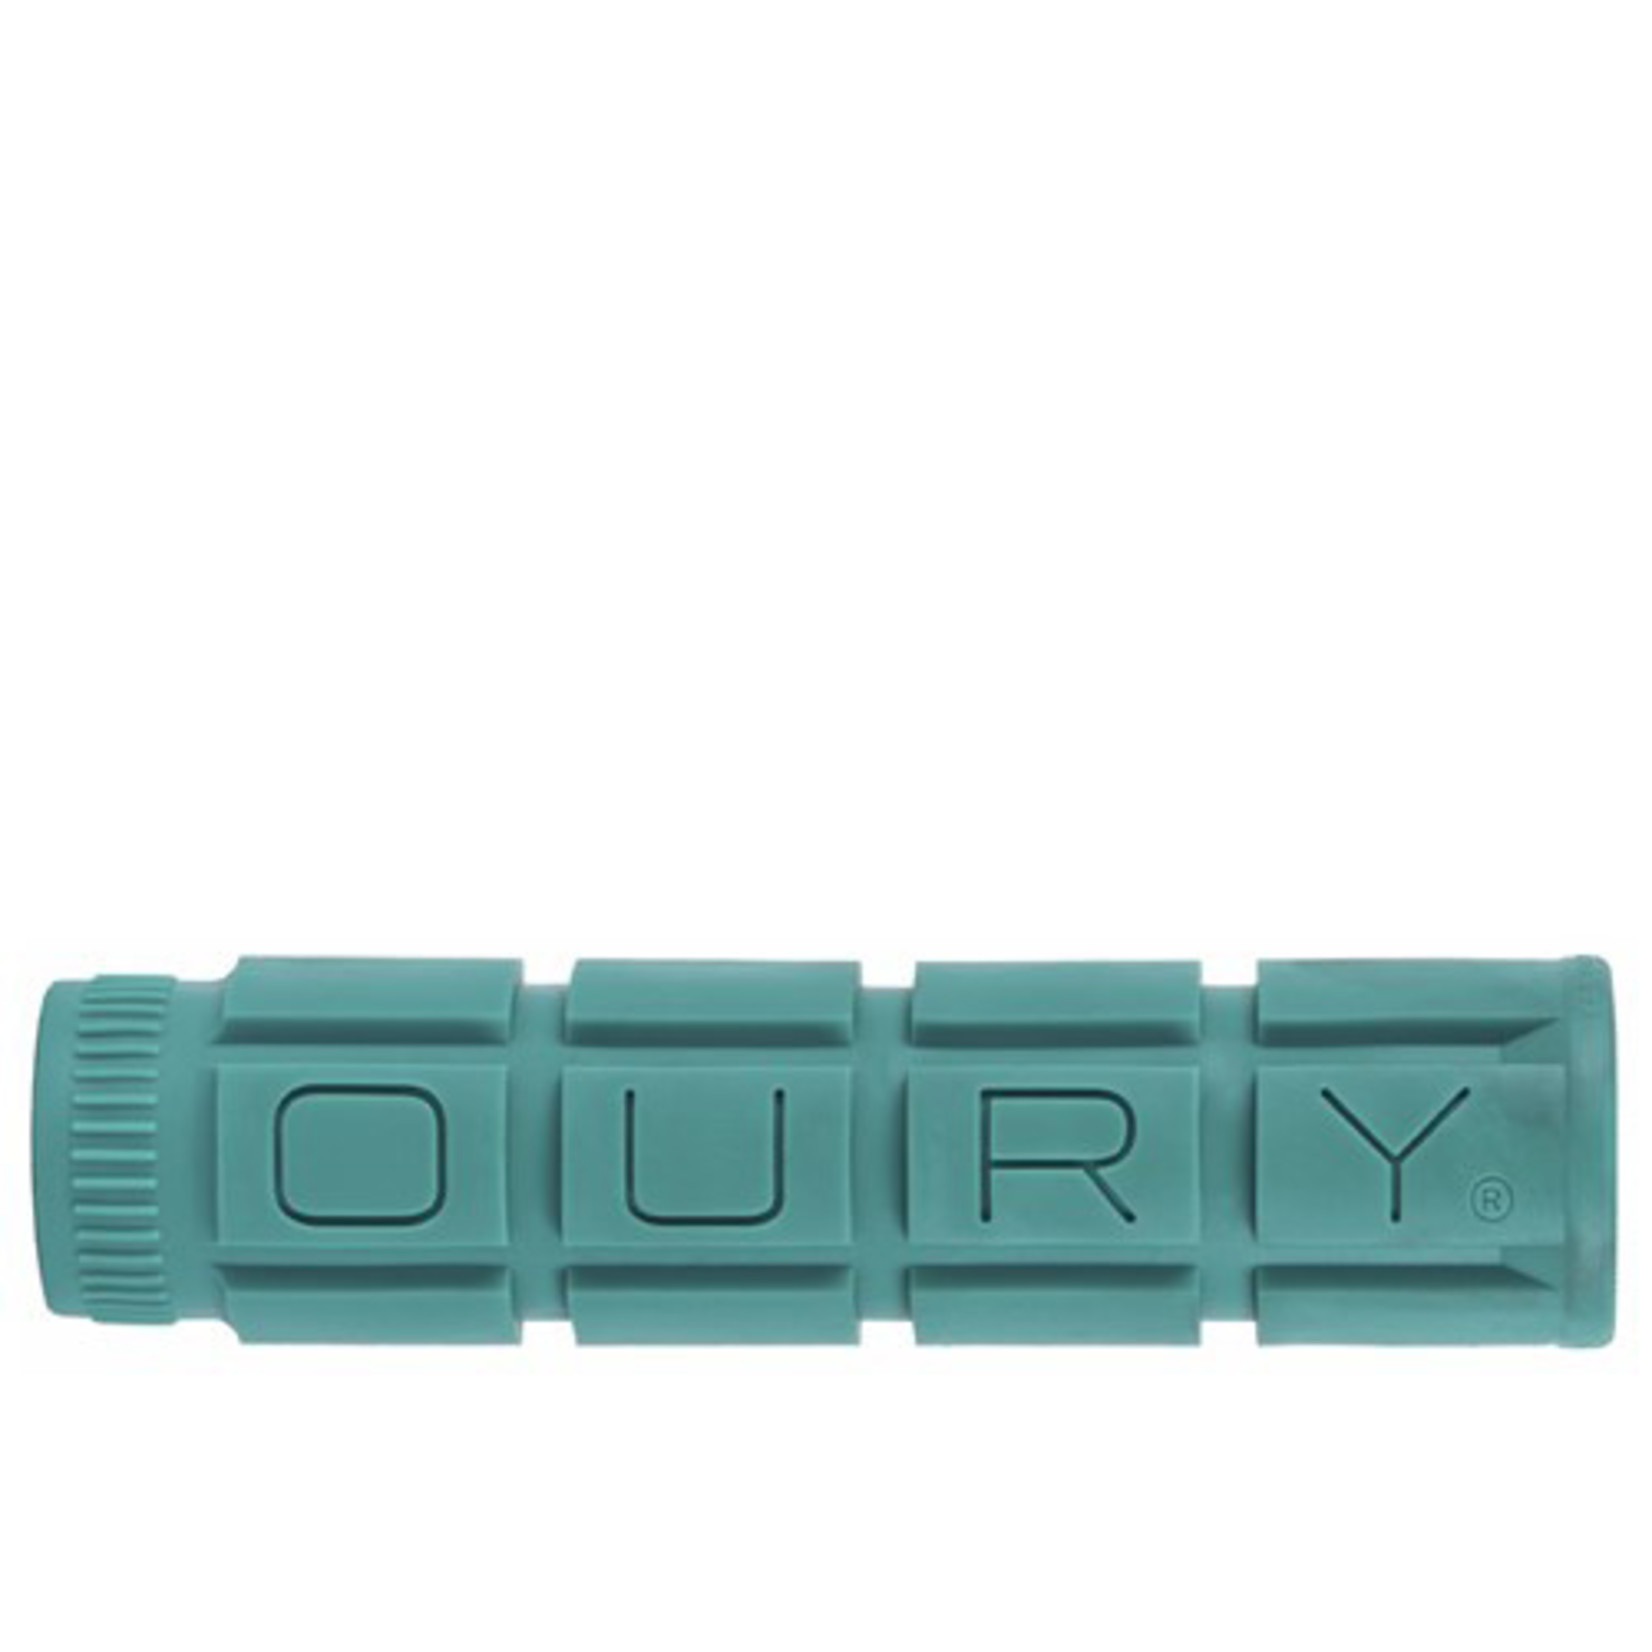 Oury Oury Single Compound Bike Handlebar Grips V2 - Anti-Vibration - 135mm - Teal